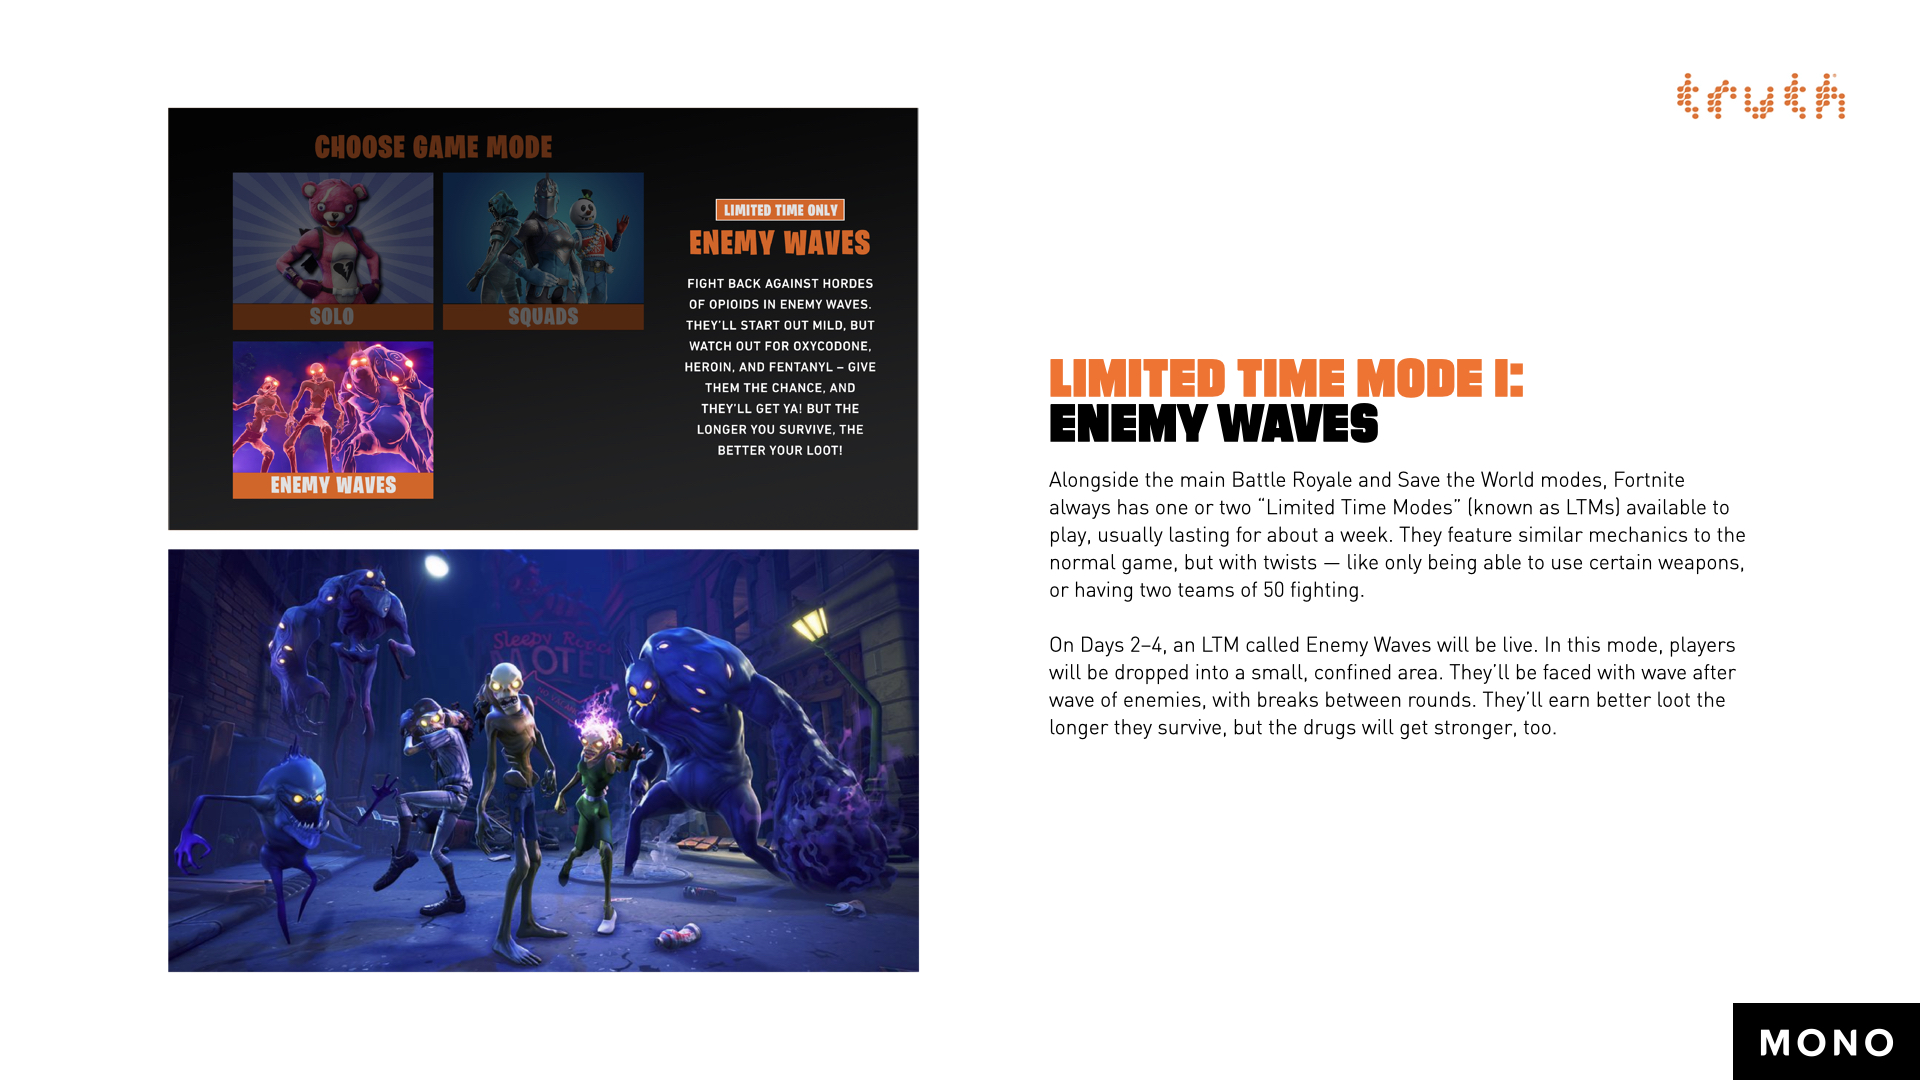 Limited Time Mode 1: Enemy Waves. Alongside the main Battle Royale and Save the World modes, Fortnite always has one or two “Limited Time Modes” (known as LTMs) available to play, usually lasting for about a week. They feature similar mechanics to the normal game, but with twists — like only being able to use certain weapons, or having two teams of 50 fighting. On Days 2 through 4, an LTM called Enemy Waves will be live. In this mode, players will be dropped into a small, confined area. They’ll be faced with wave after wave of enemies, with breaks between rounds. They’ll earn better loot the longer they survive, but the drugs will get stronger, too.